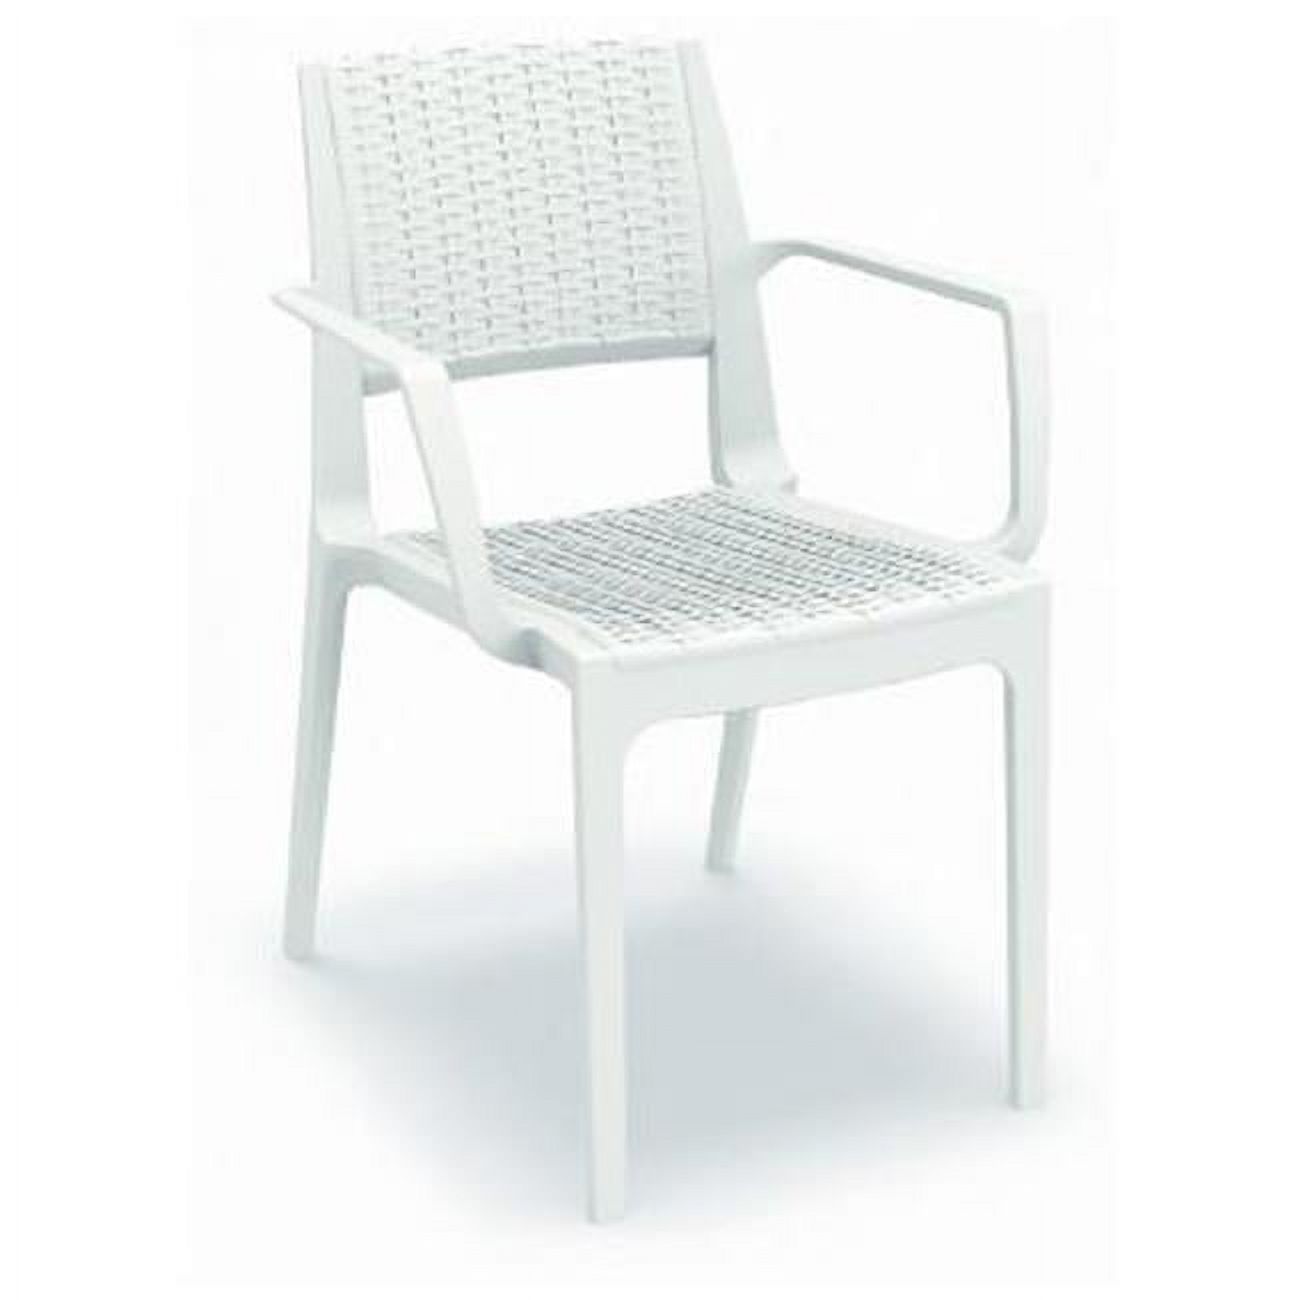 Luxury Commercial Living 32" White Outdoor Patio Wickerlook Dining Arm Chair - image 1 of 9